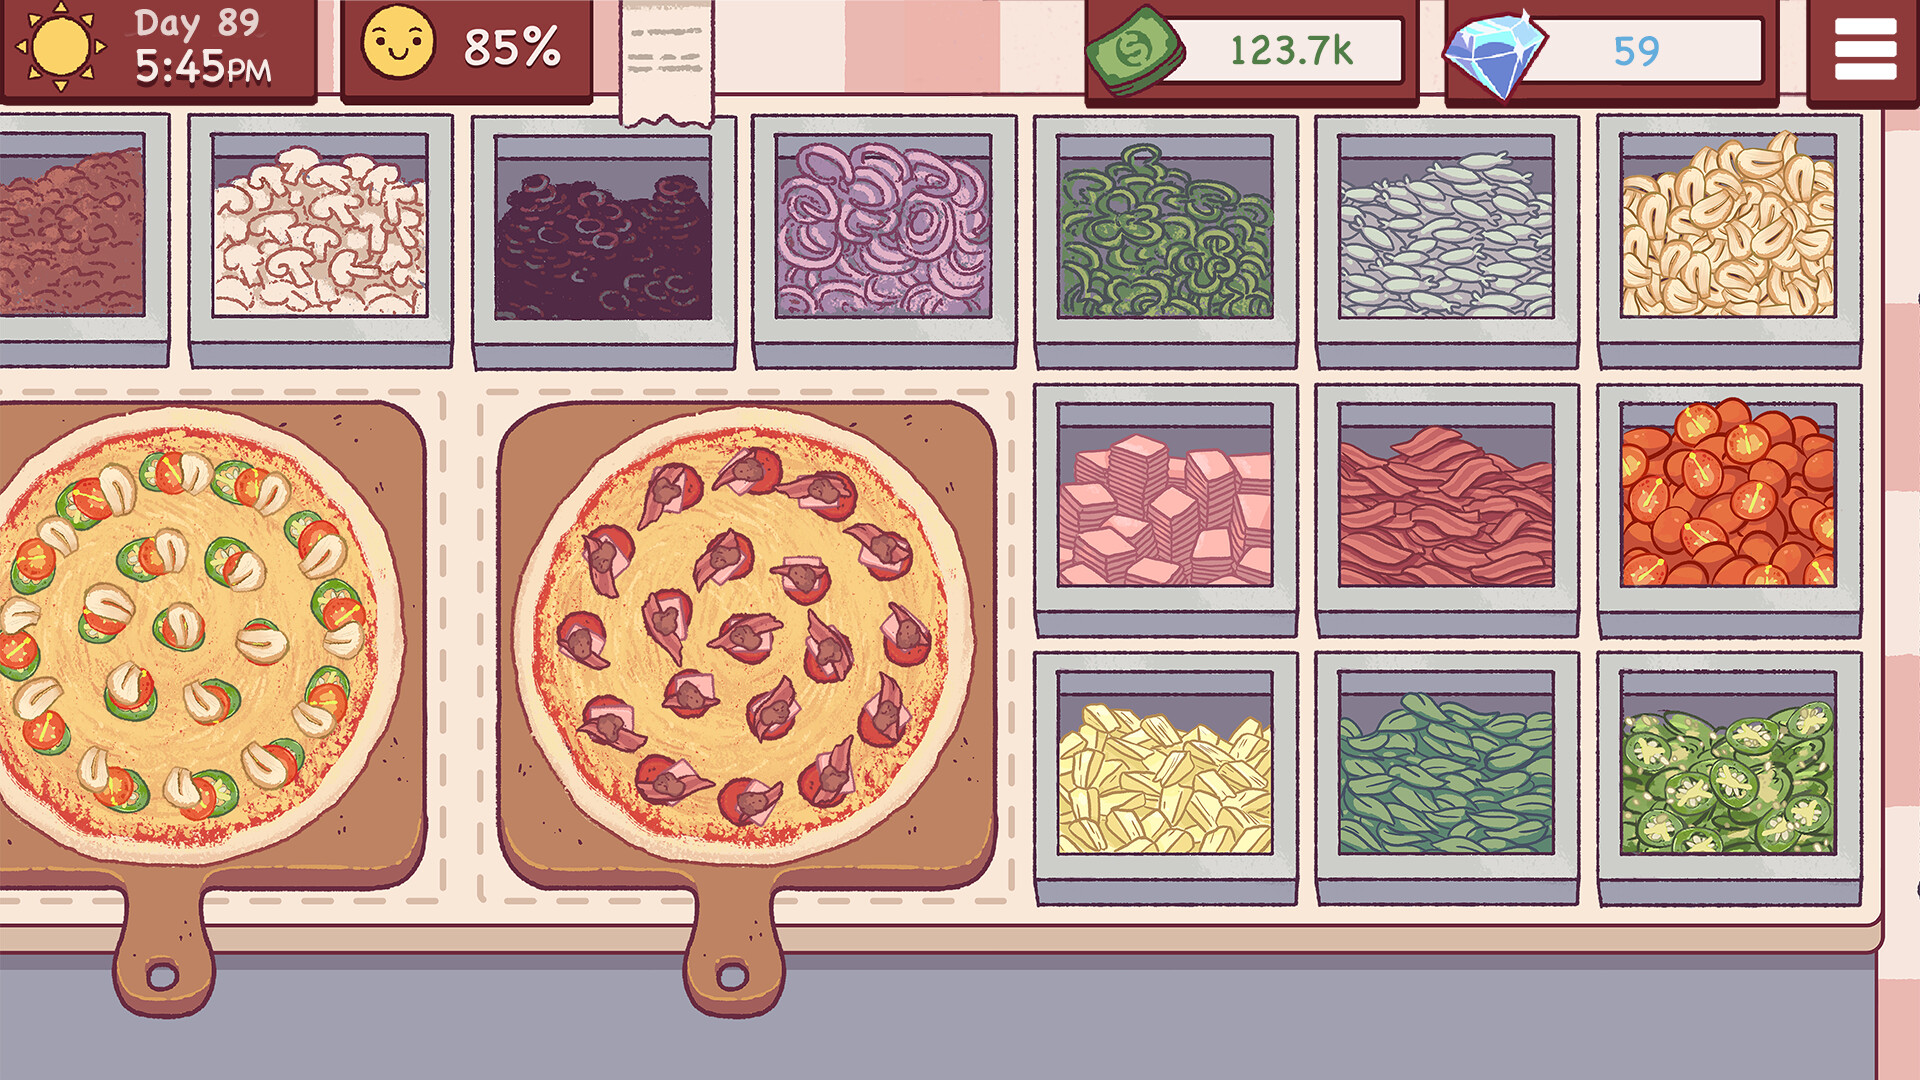 Good Pizza, Great Pizza - Apps on Google Play